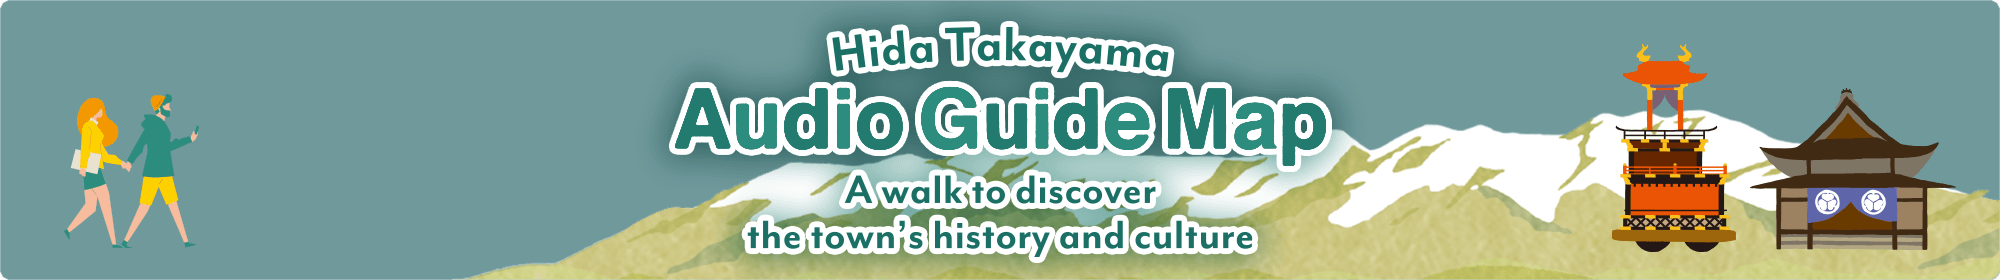 Hida Takayama Audio Guide Map - A walk to discover the town’s history and culture